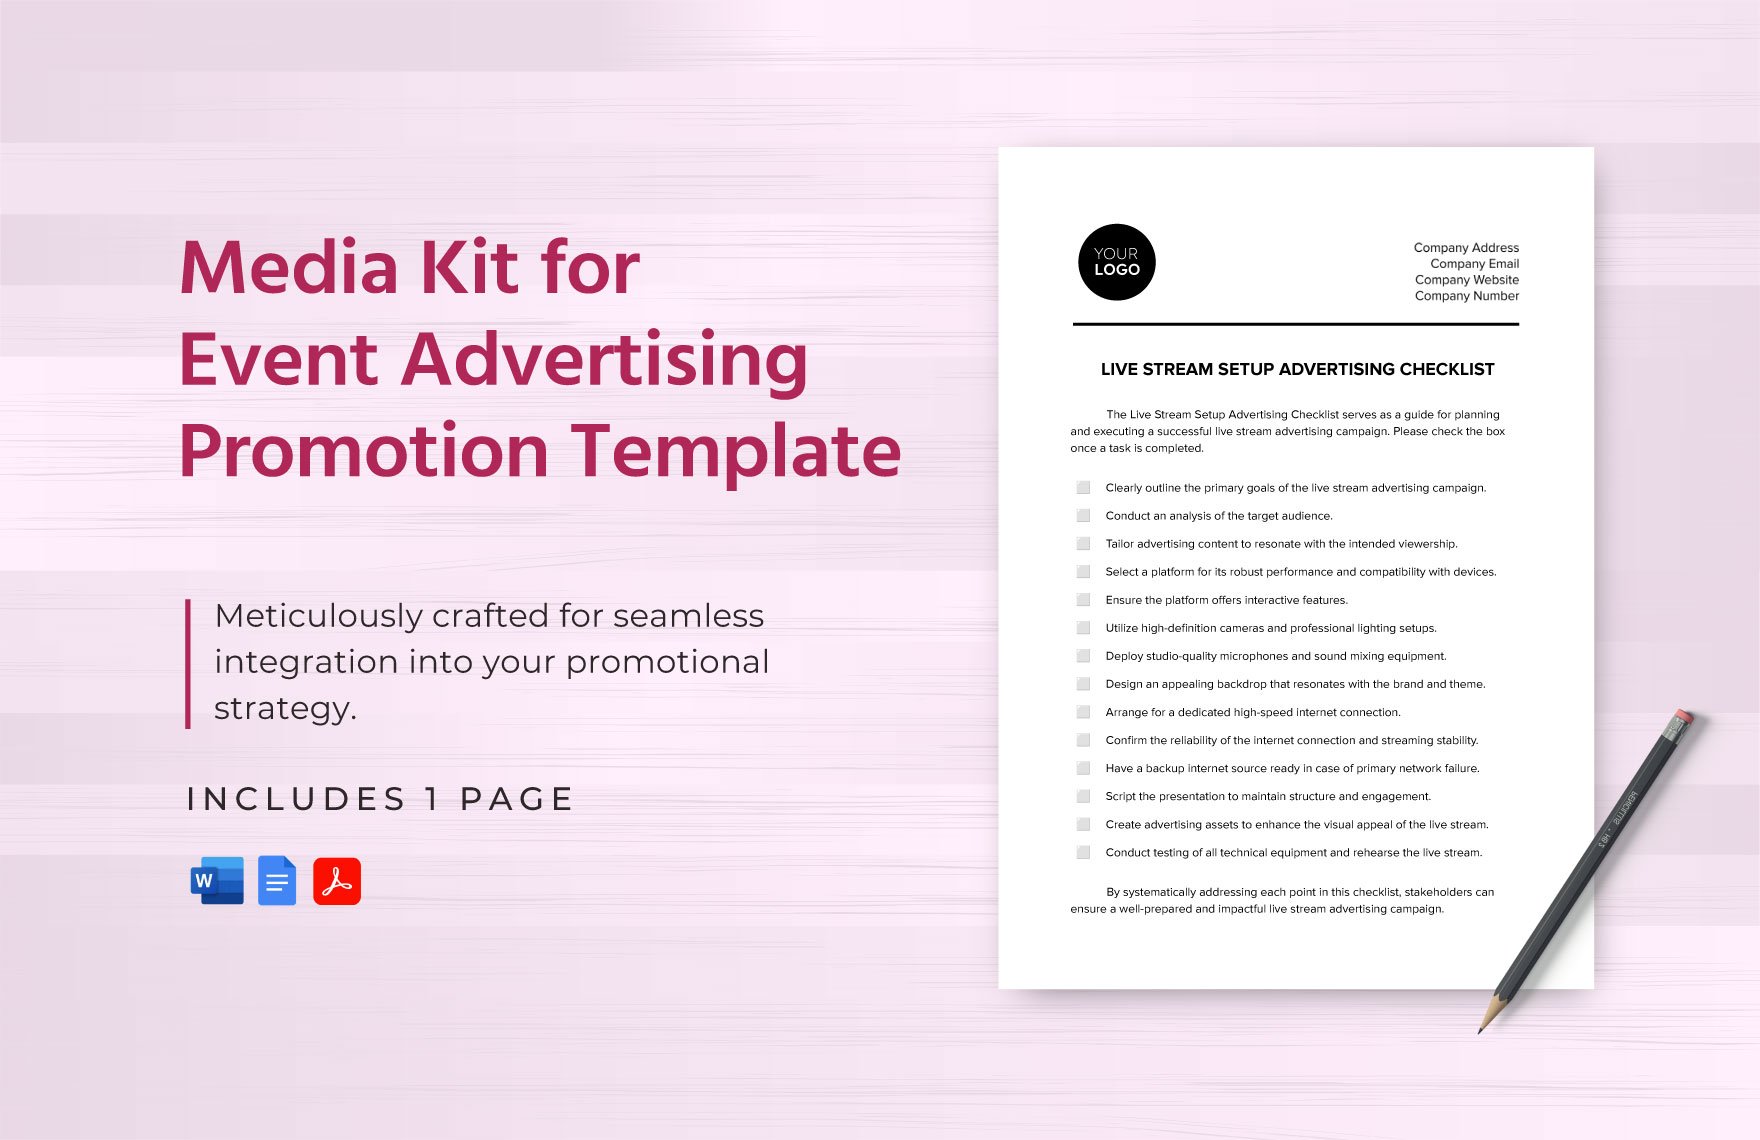 Media Kit for Event Advertising Promotion Template